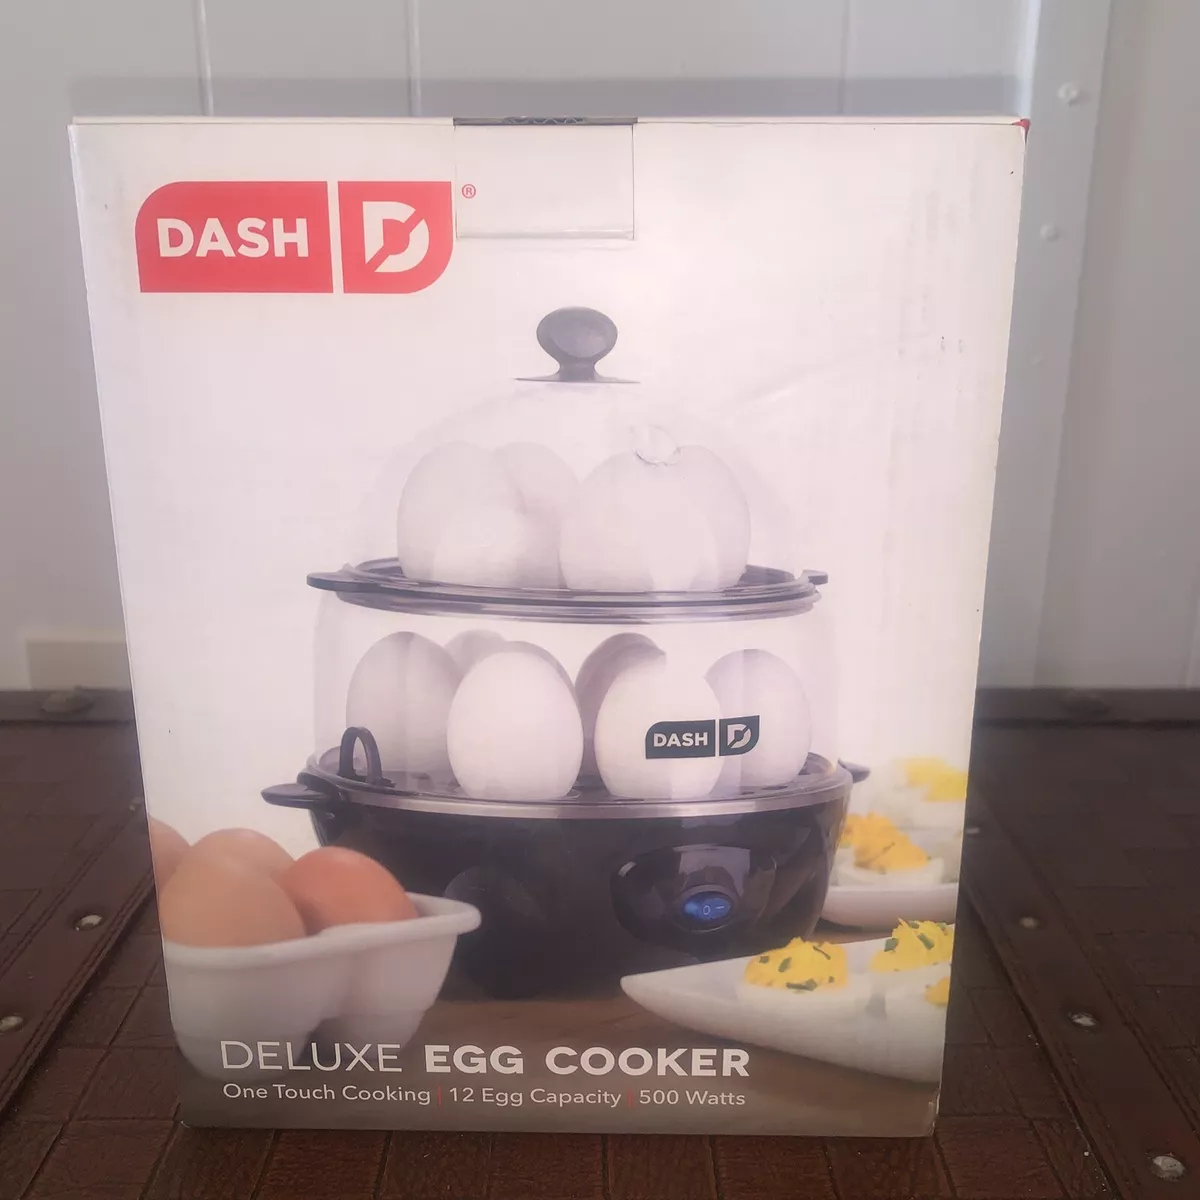 DELUXE EGG COOKER - DASH - 12 EGG CAPACITY ONE TOUCH COOKING NEW